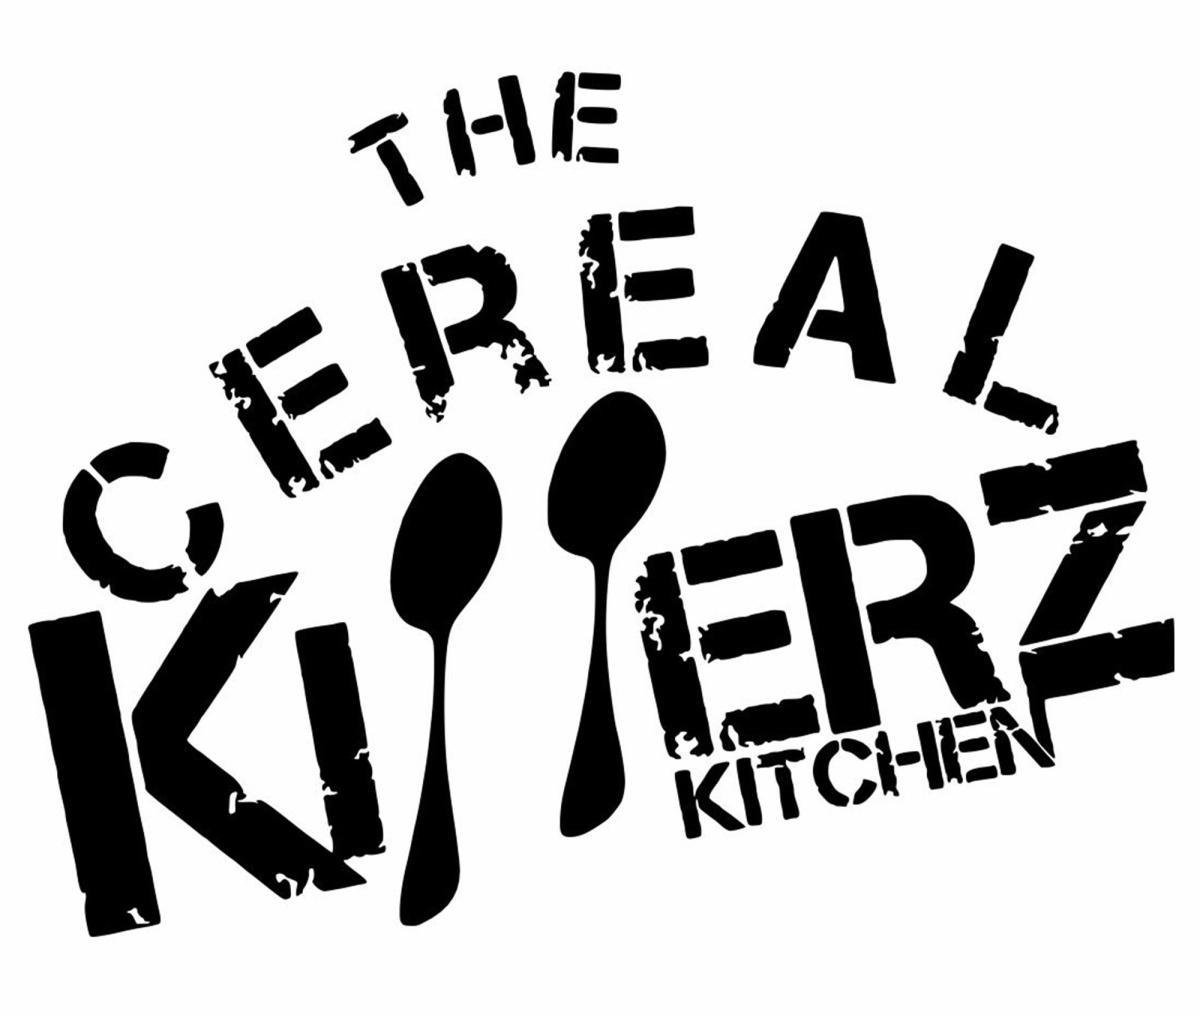 The Cereal Killerz Kitchen @ Planet Hollywood 